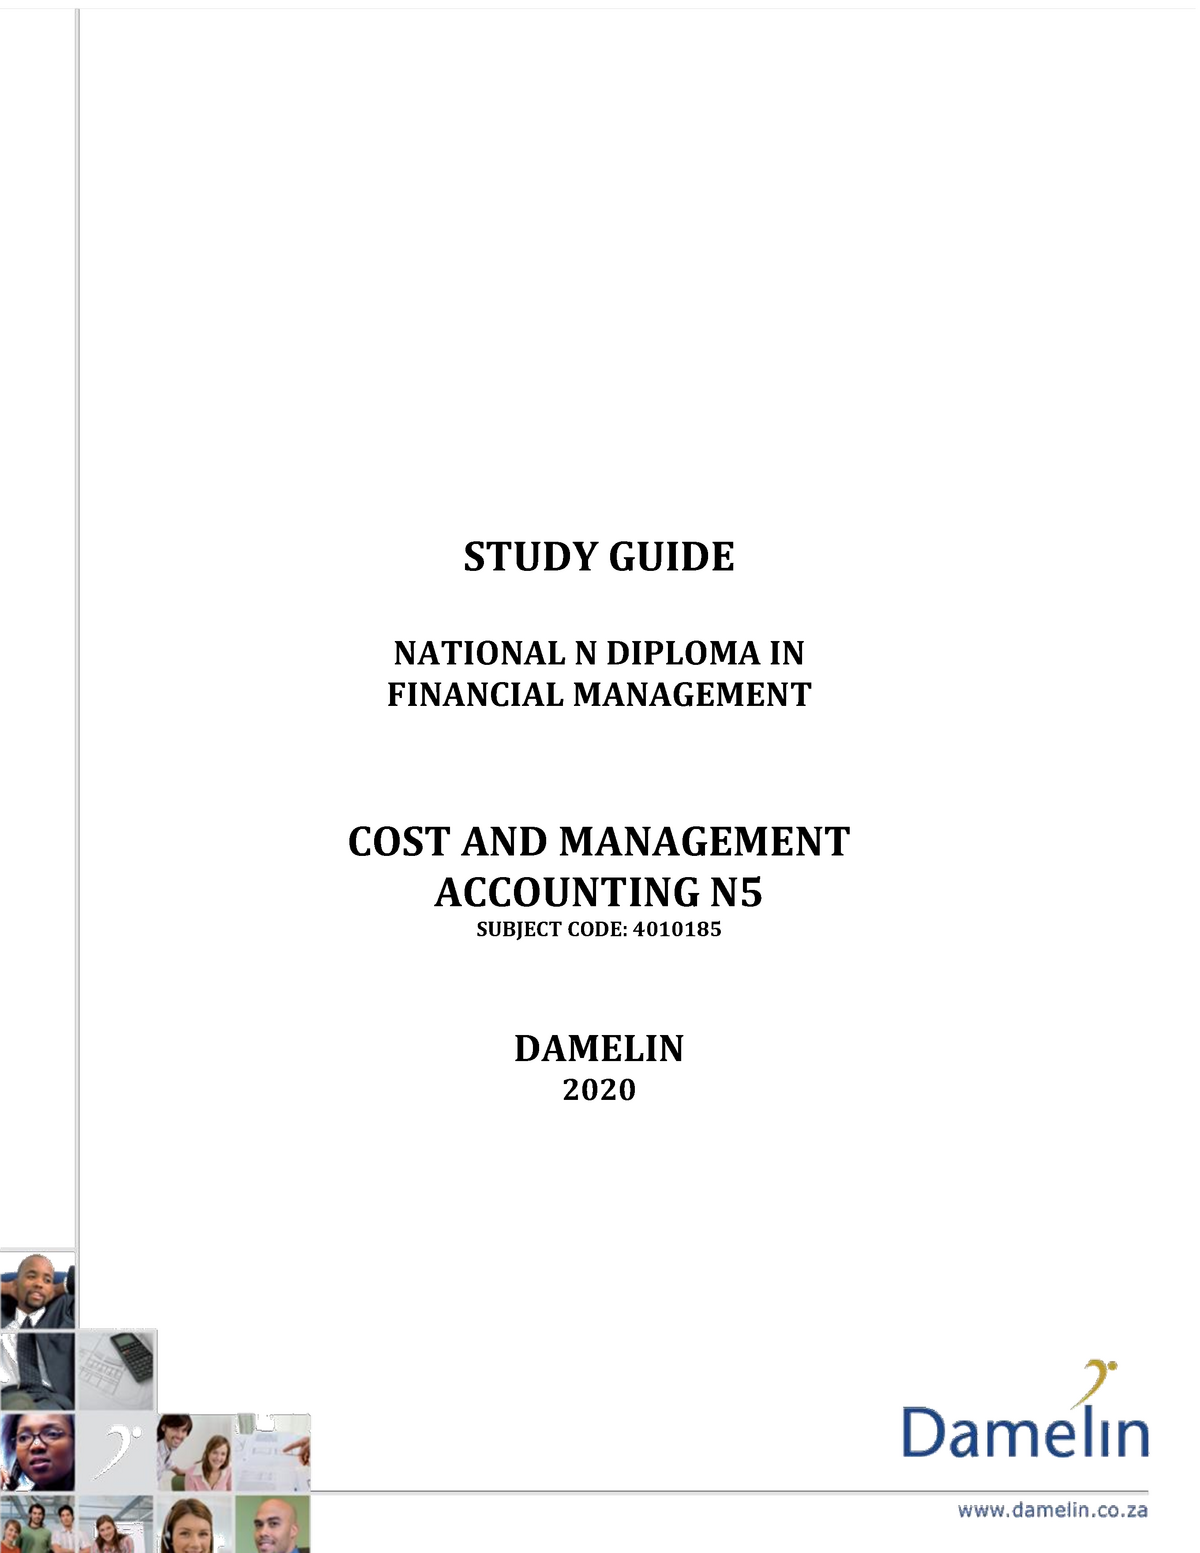 research paper about cost management